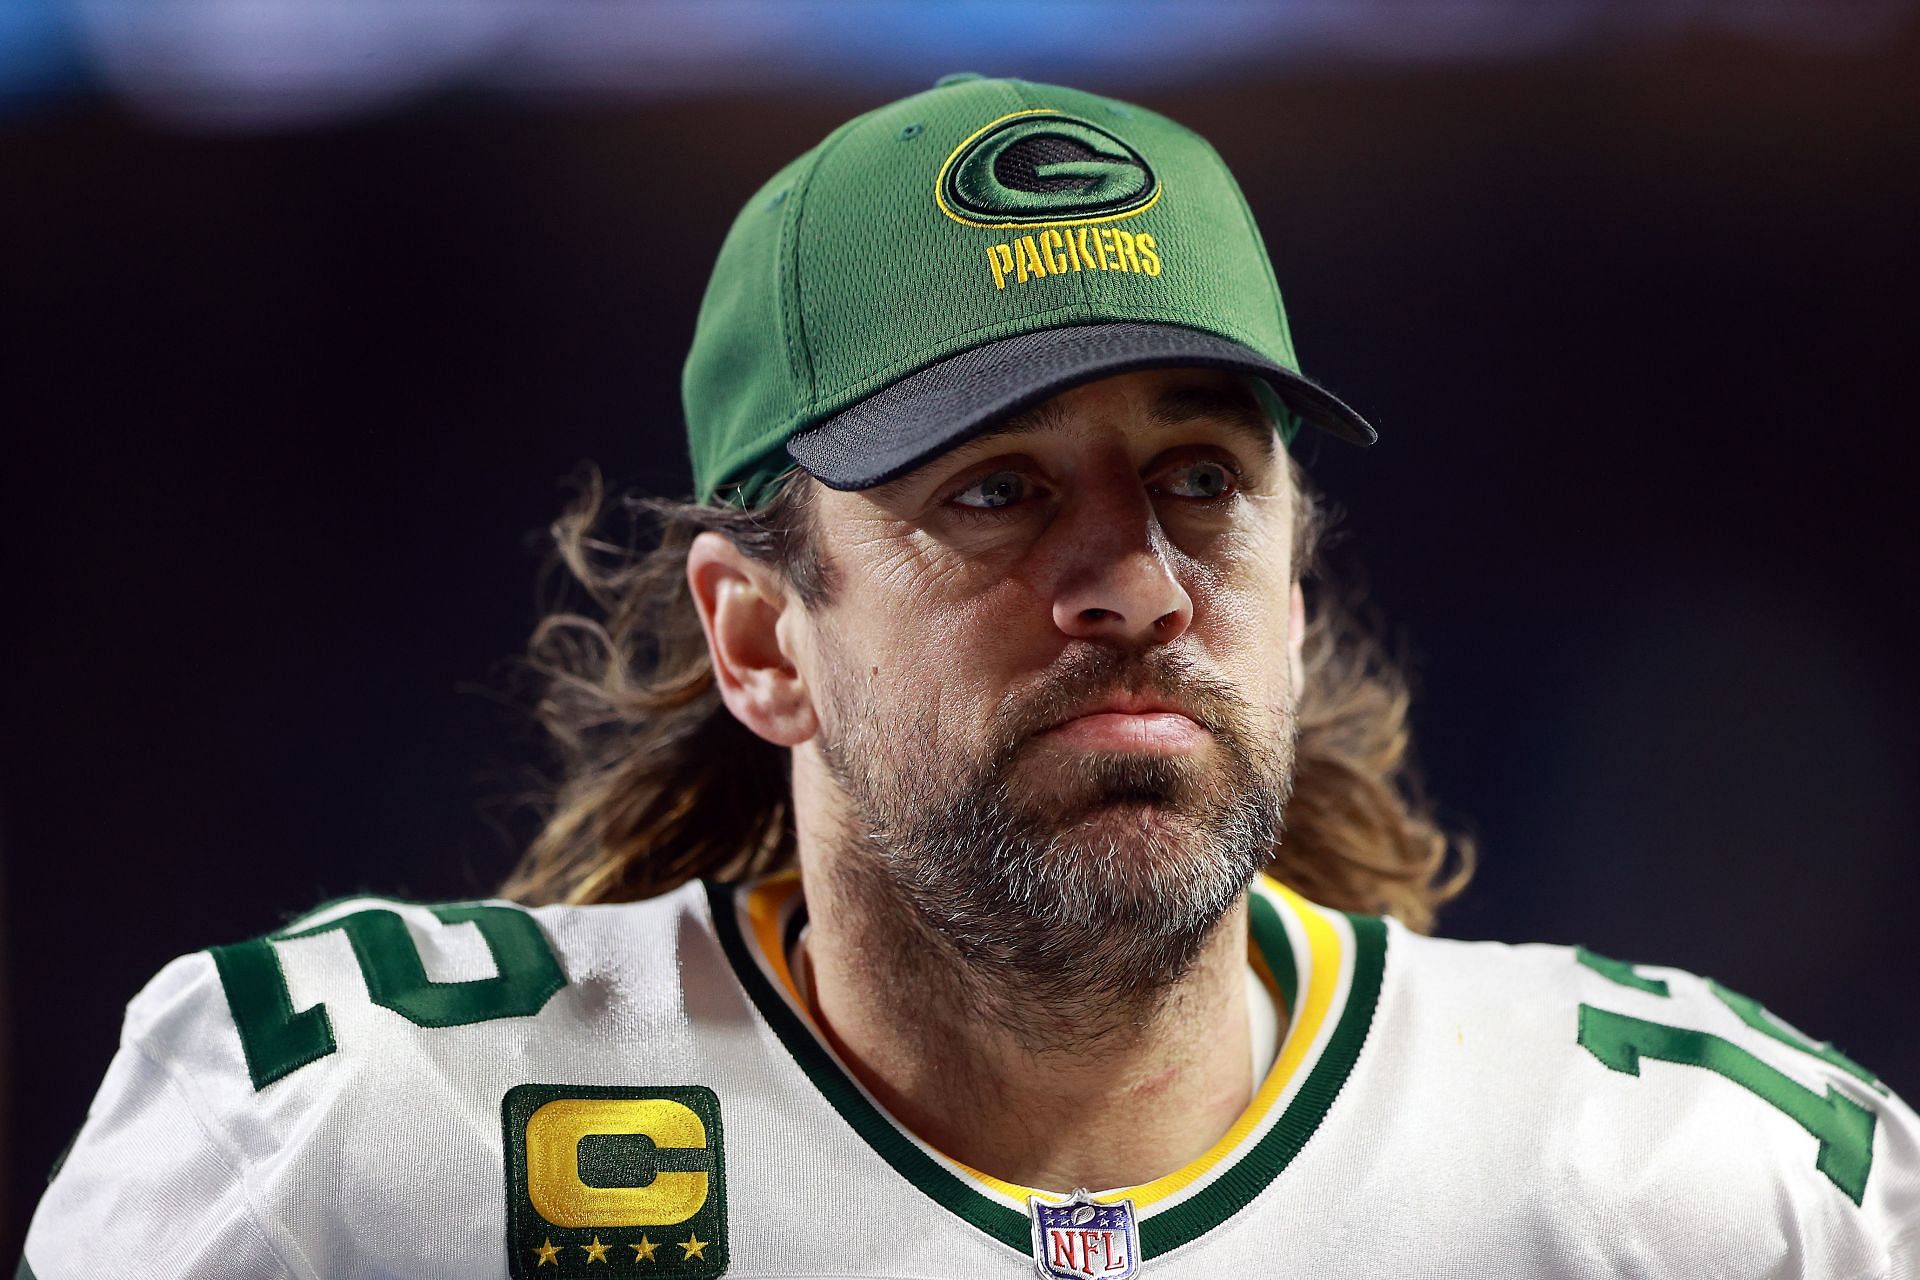 Green Bay Packers quarterback Aaron Rodgers was trolled at the Bucks game.